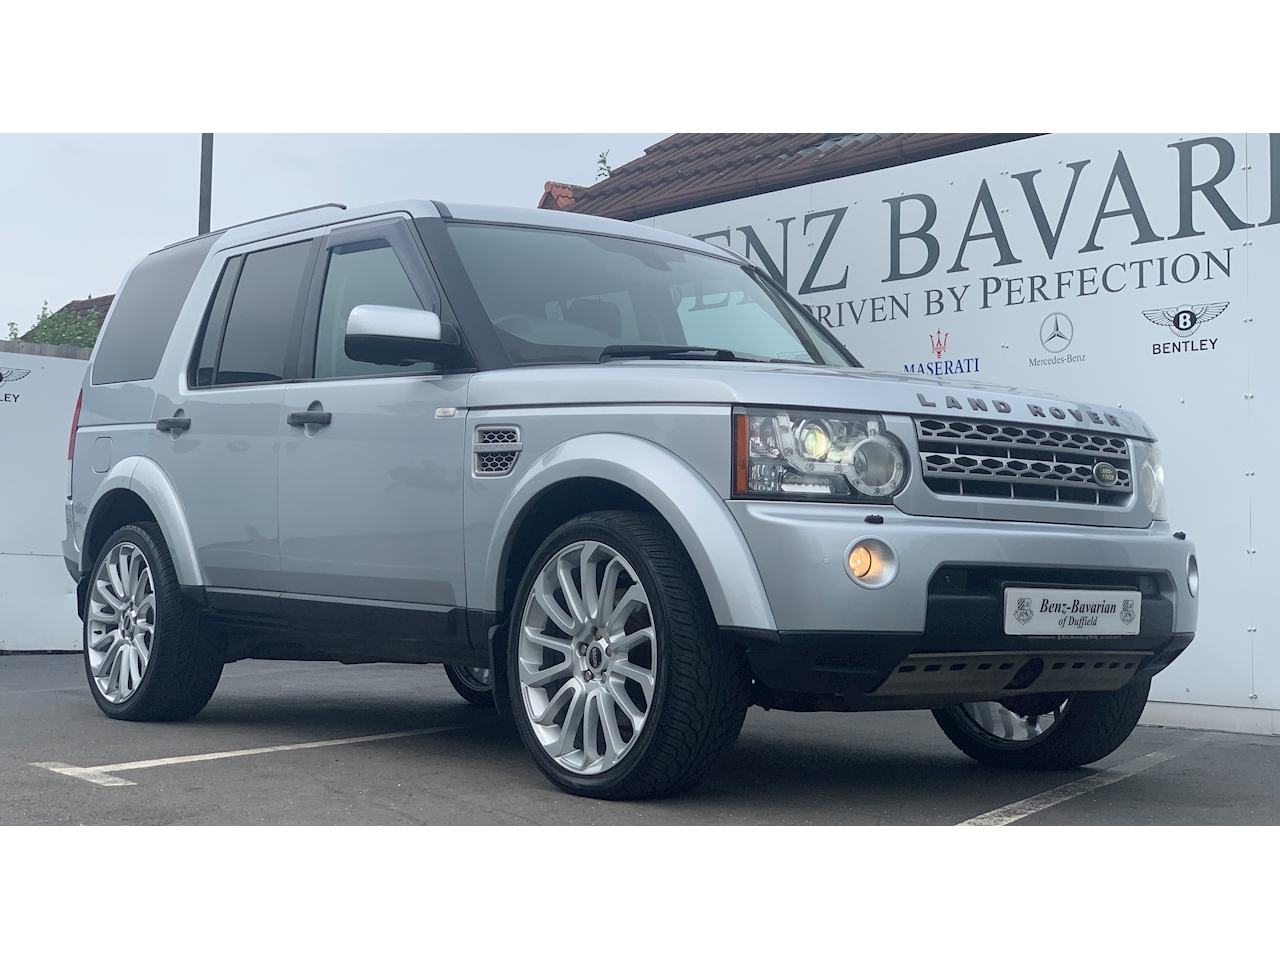 Land Rover Discovery 4 3.0 TD V6 HSE SUV 5dr Diesel Auto 4WD Euro 4 (245 ps)